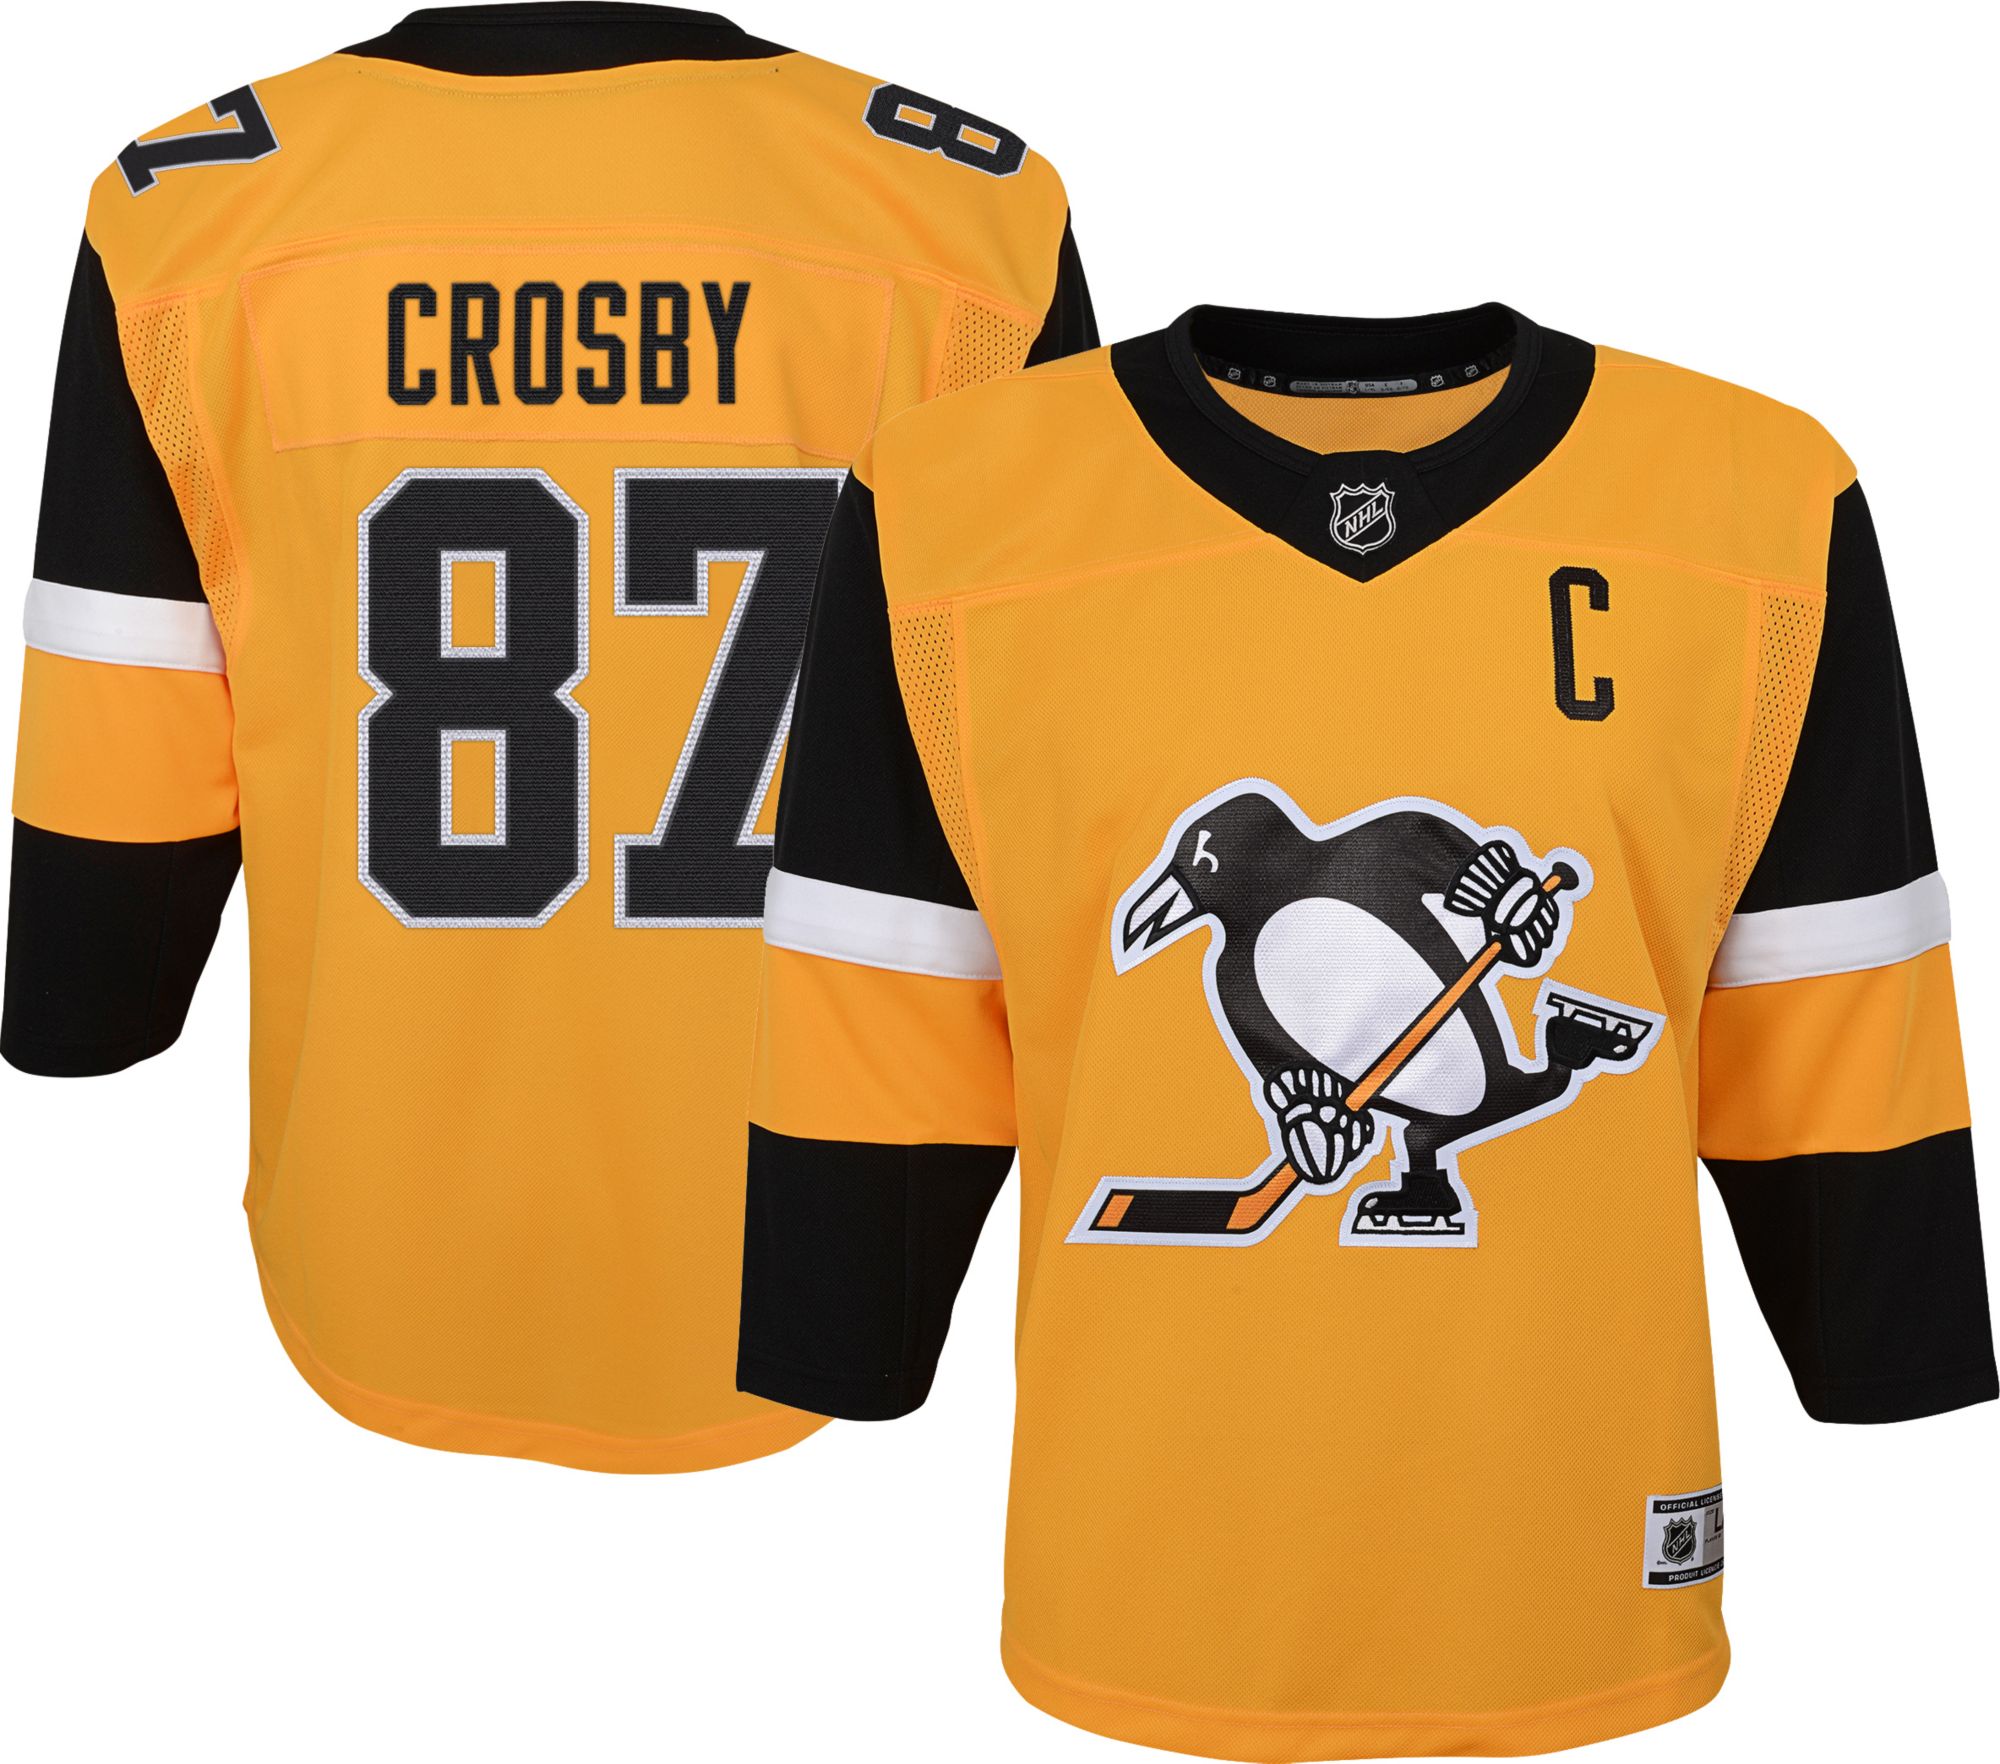 youth crosby jersey